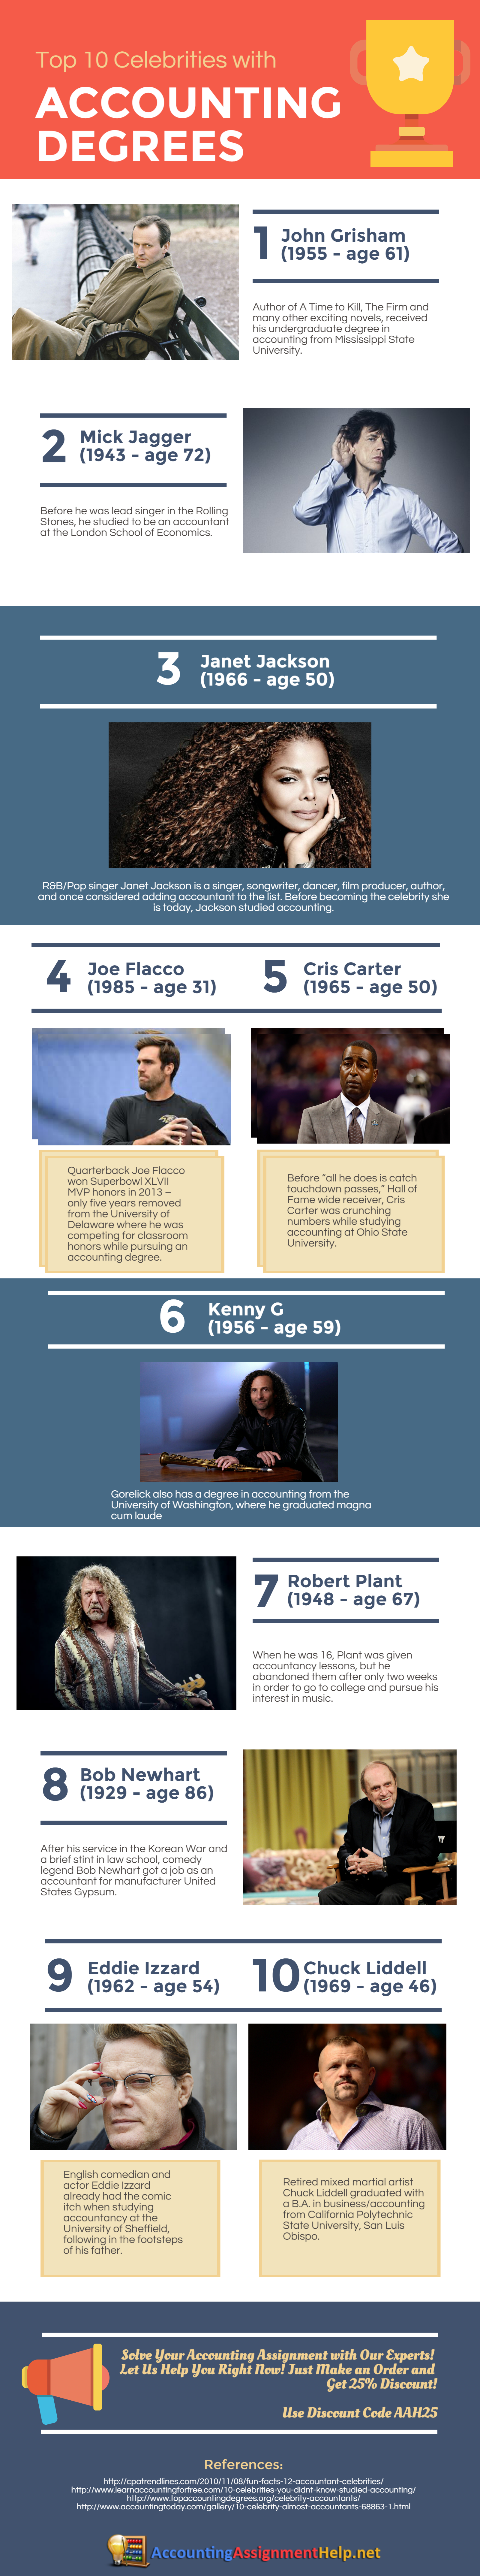 Top 10 Celebrities With Accounting Degrees